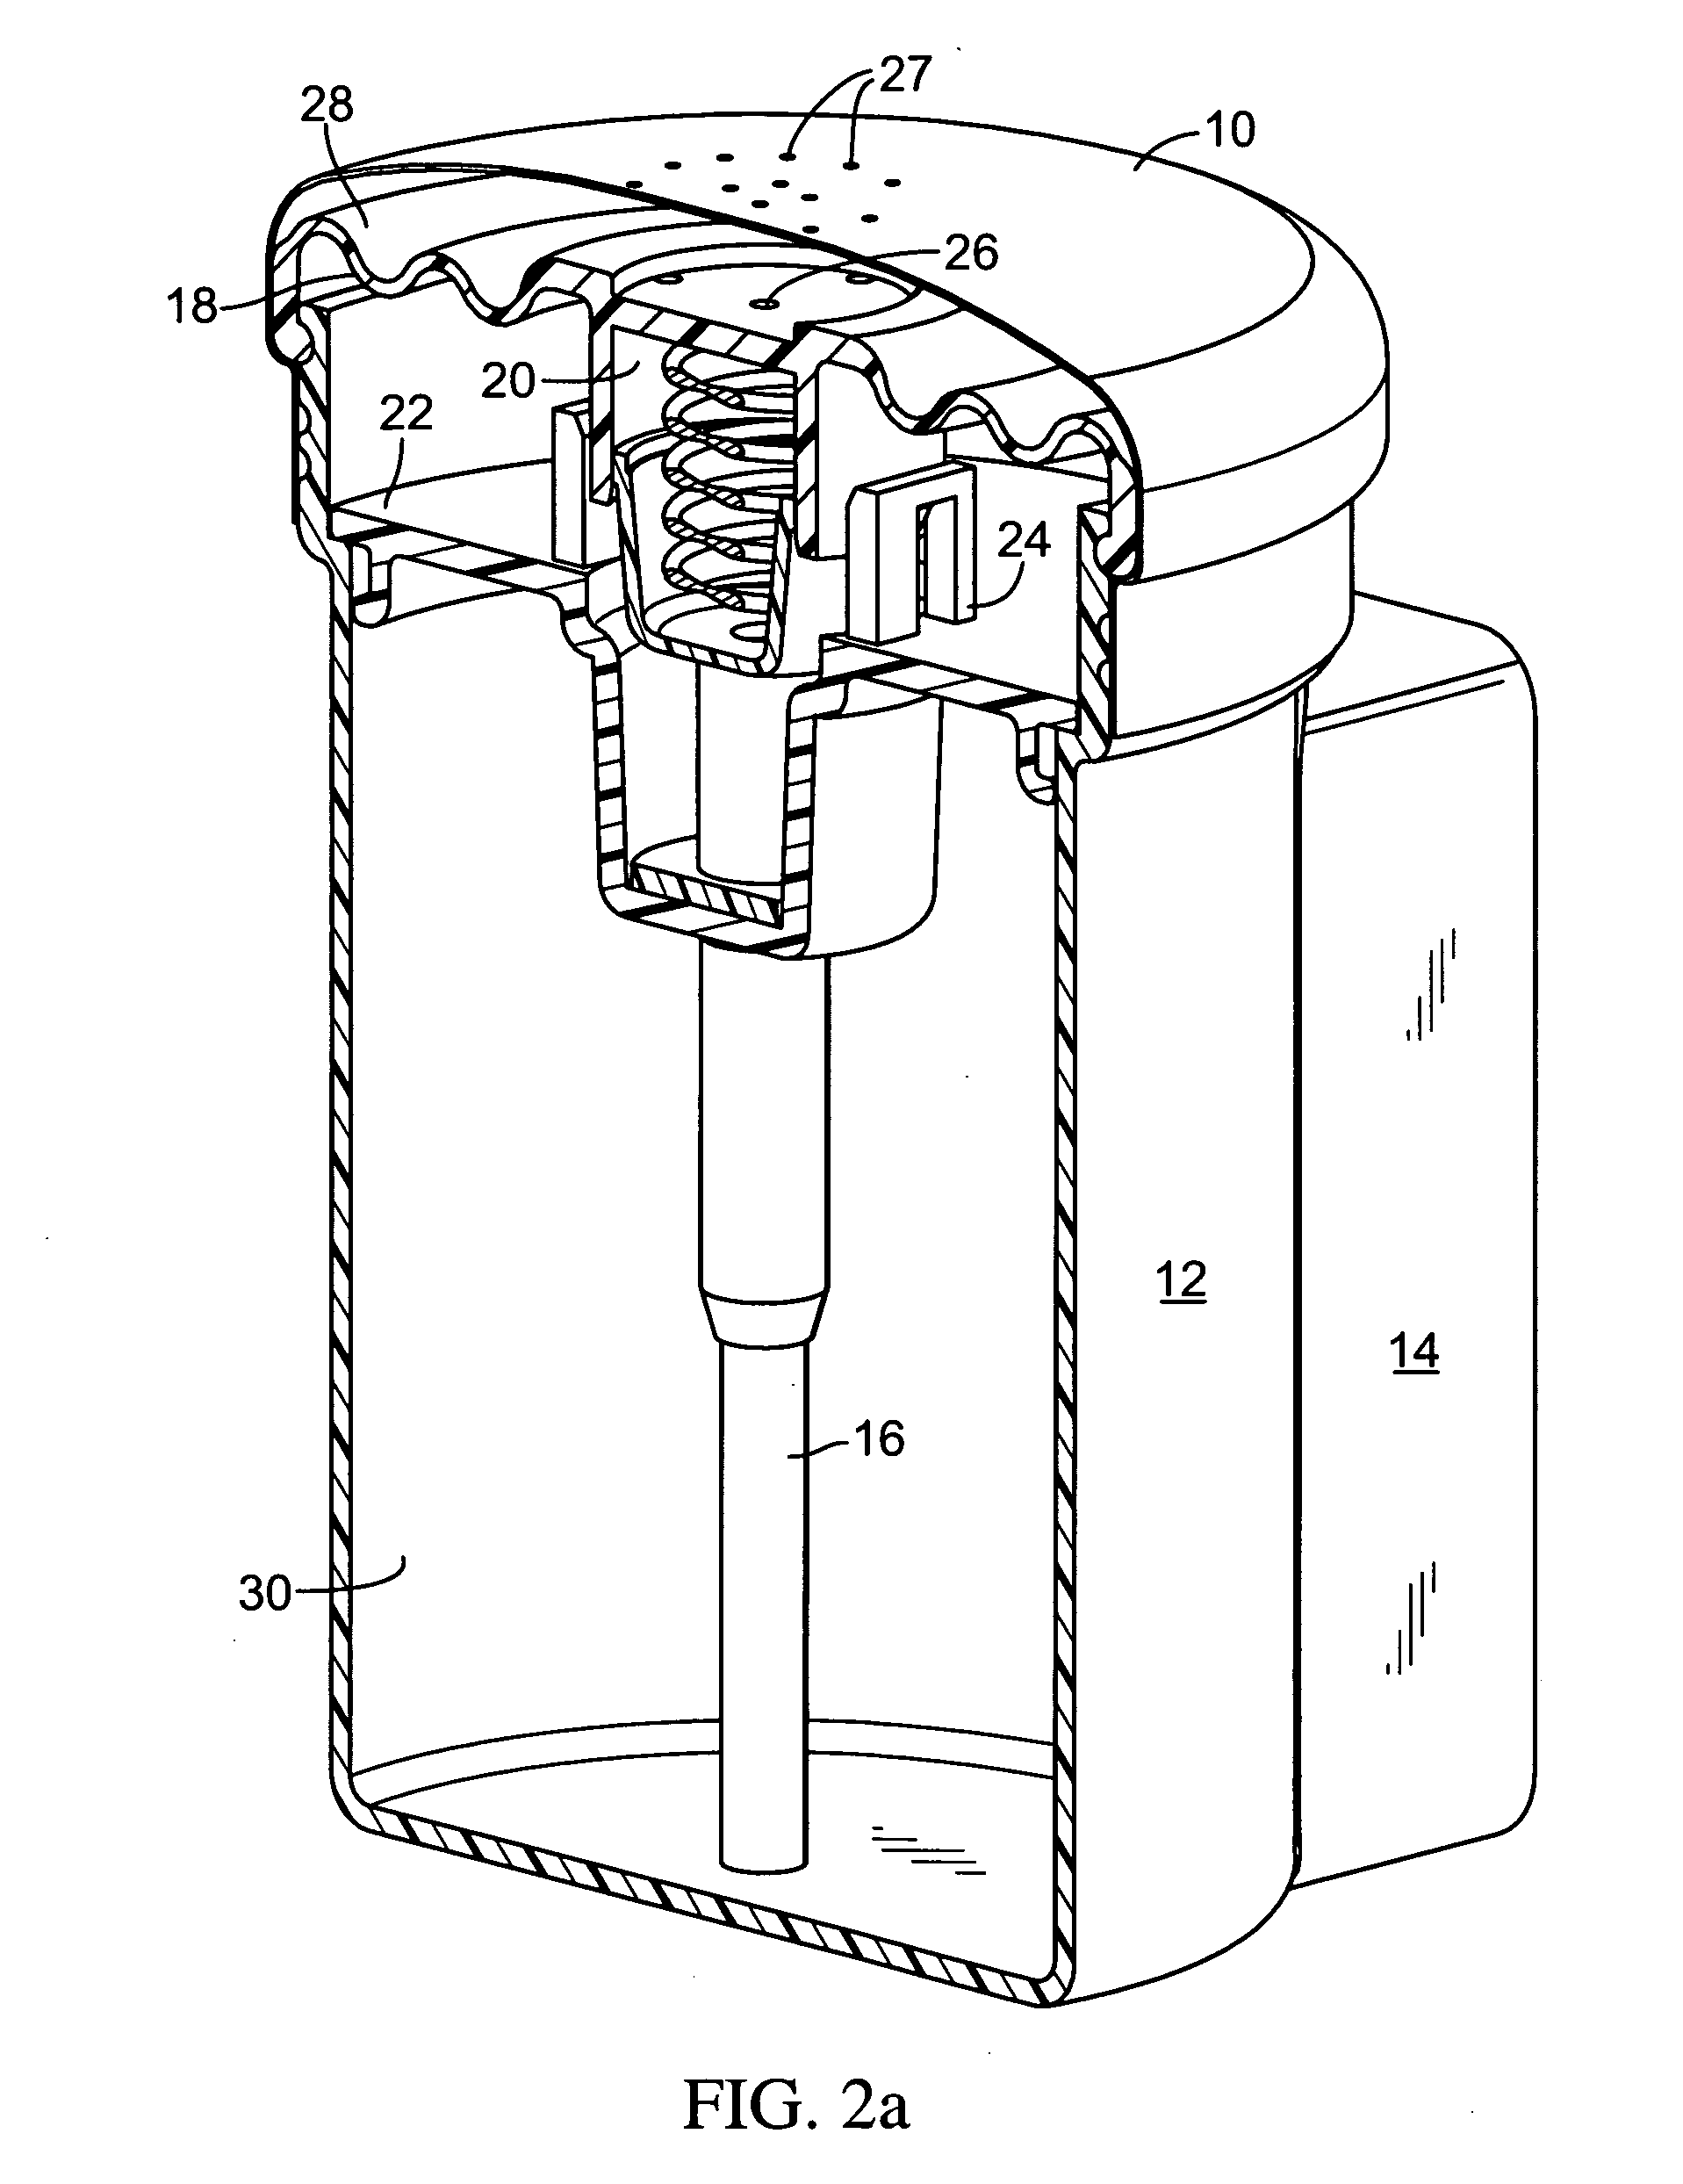 Apparatus for supporting and disinfecting a handheld instrument and/or a portion of the user's hand